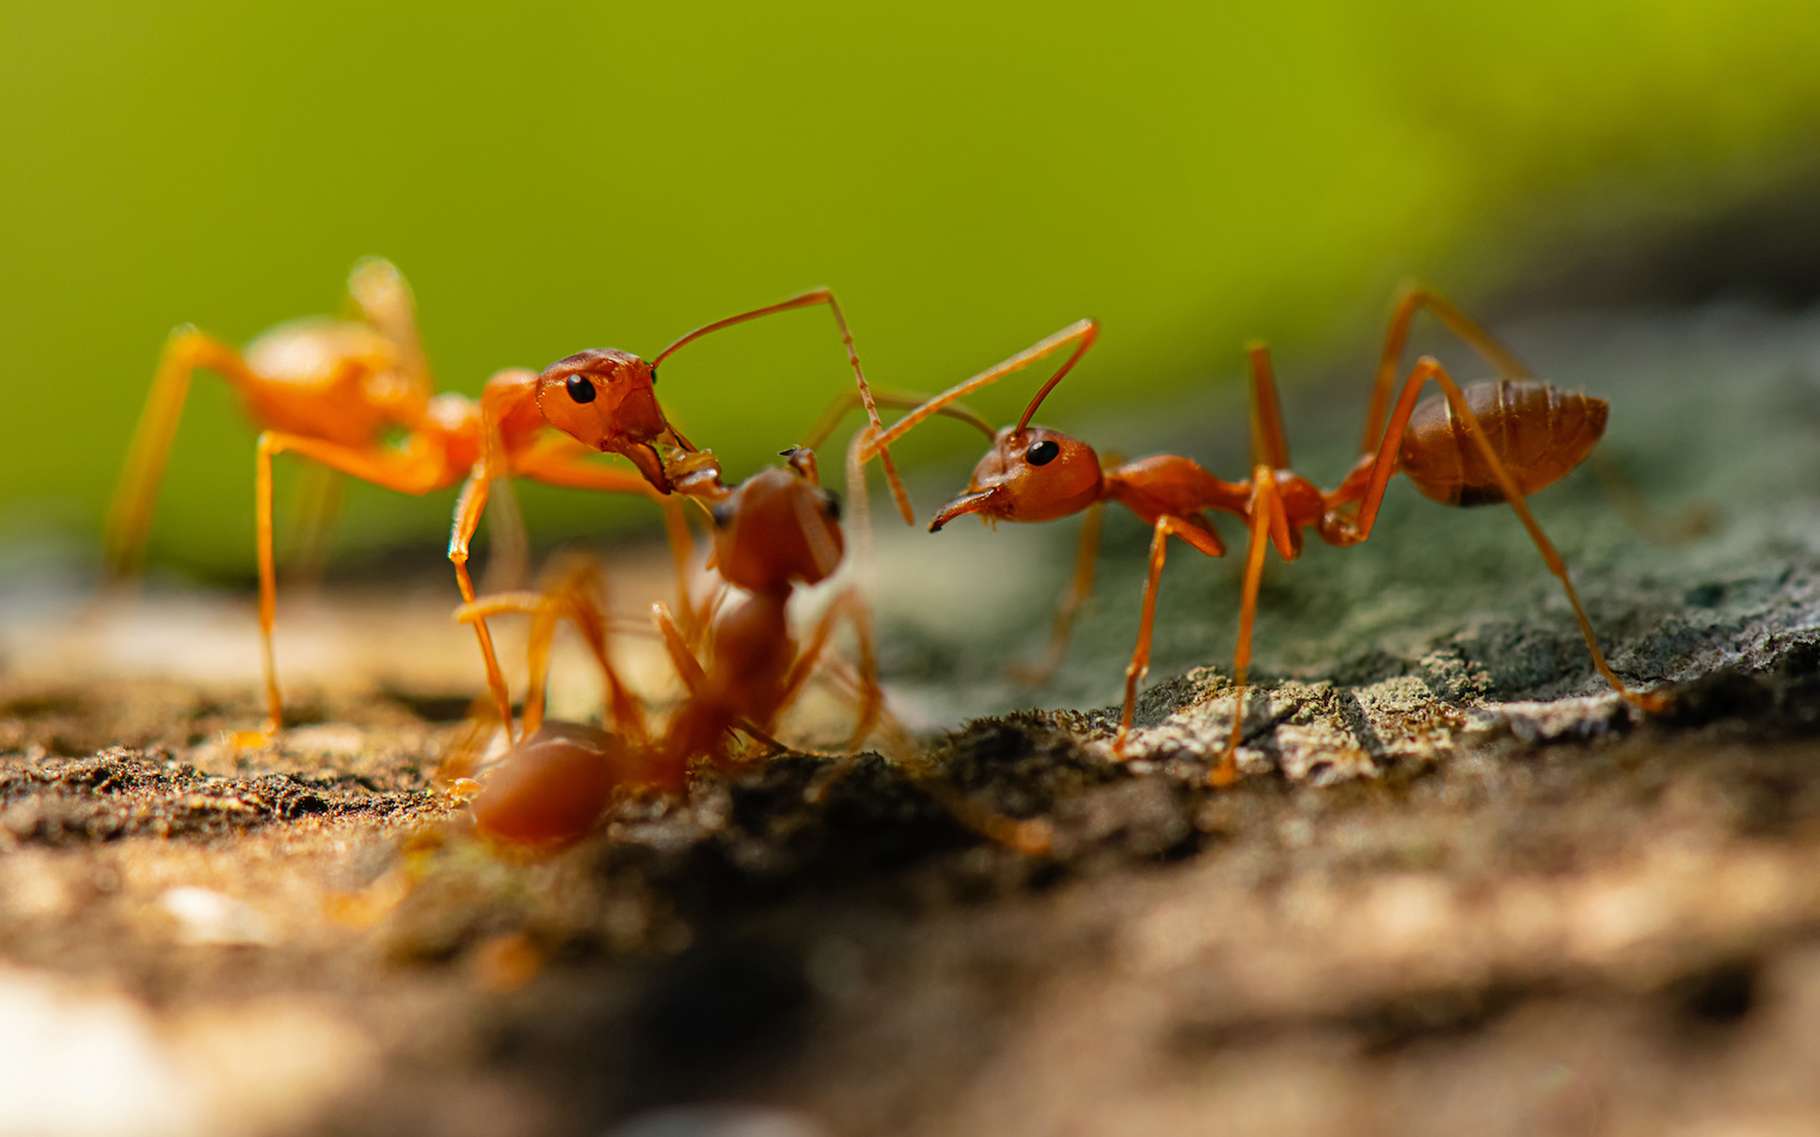 This is how fire ants build a bridge